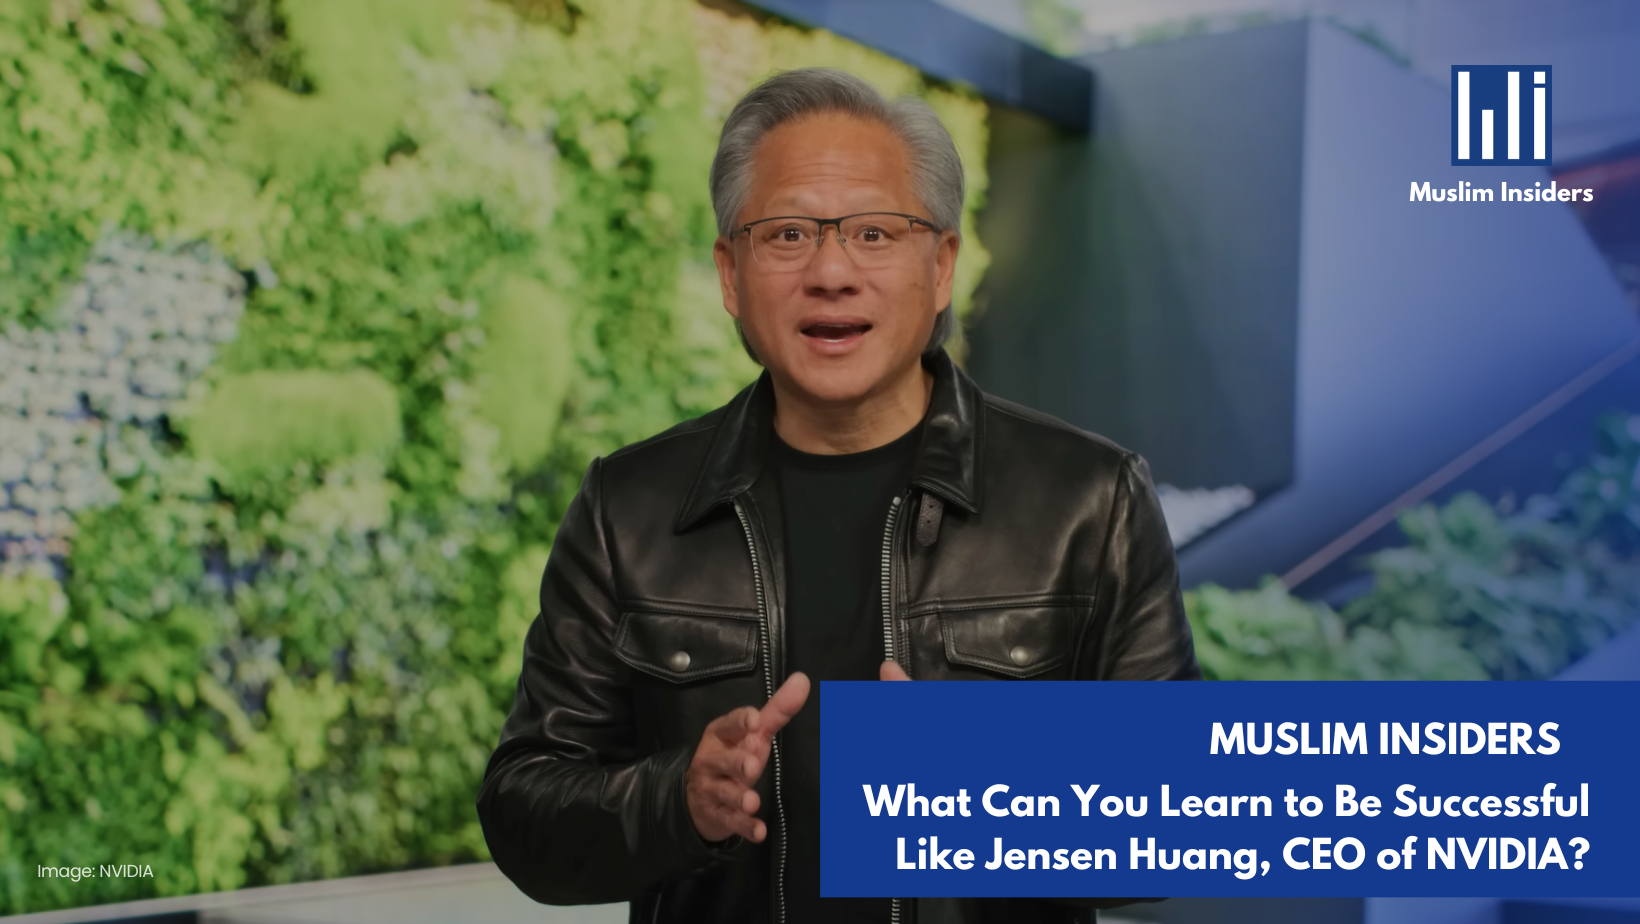 What Can You Learn to Be Successful Like Jensen Huang, CEO of NVIDIA